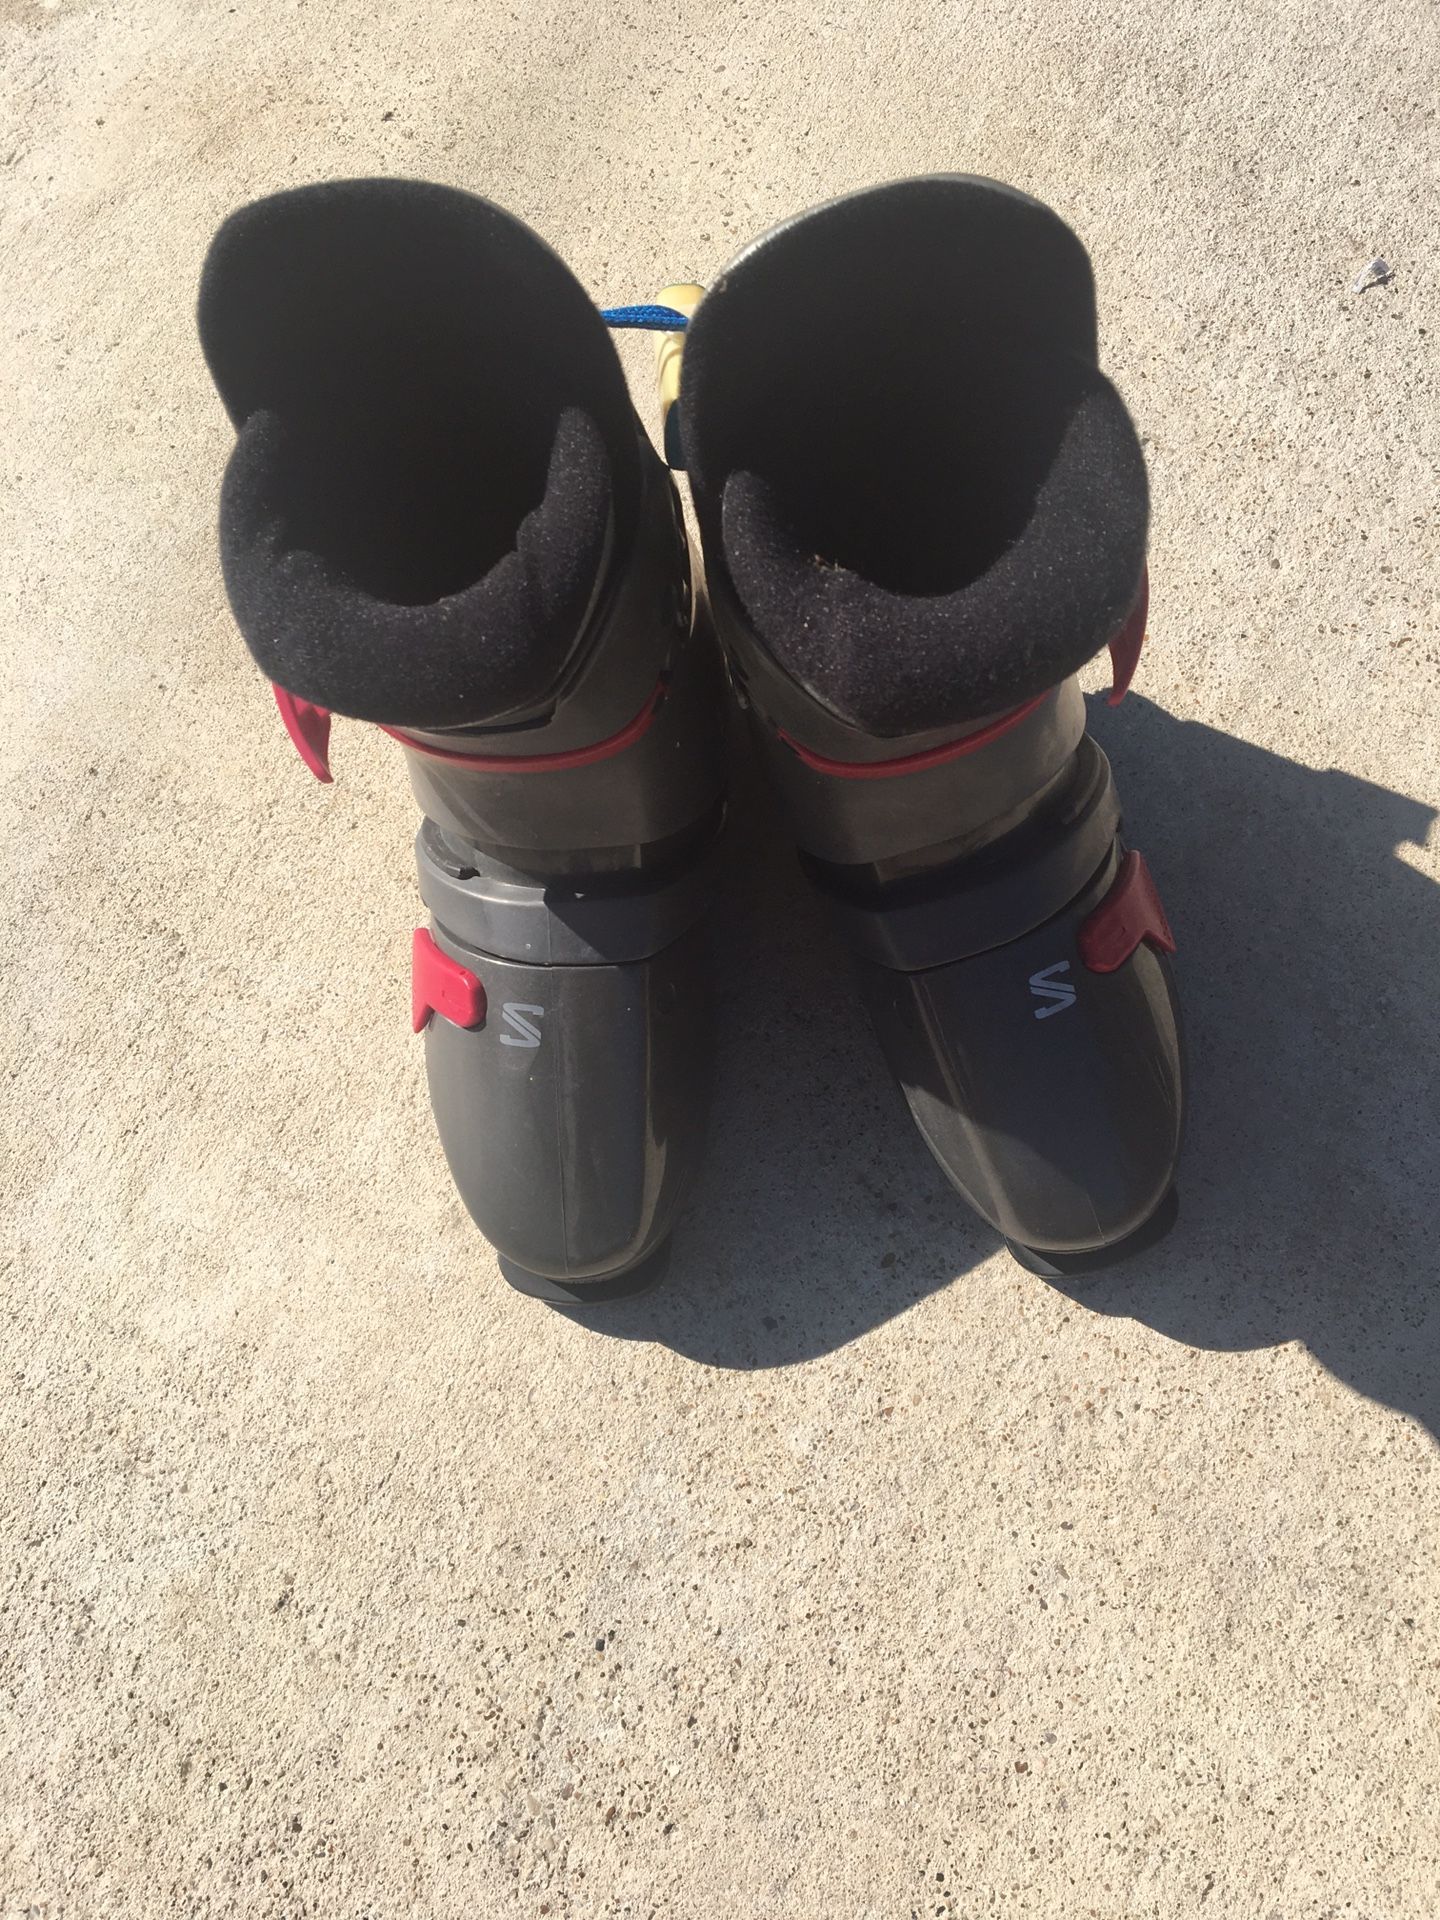 Men’s ski boots with carry case